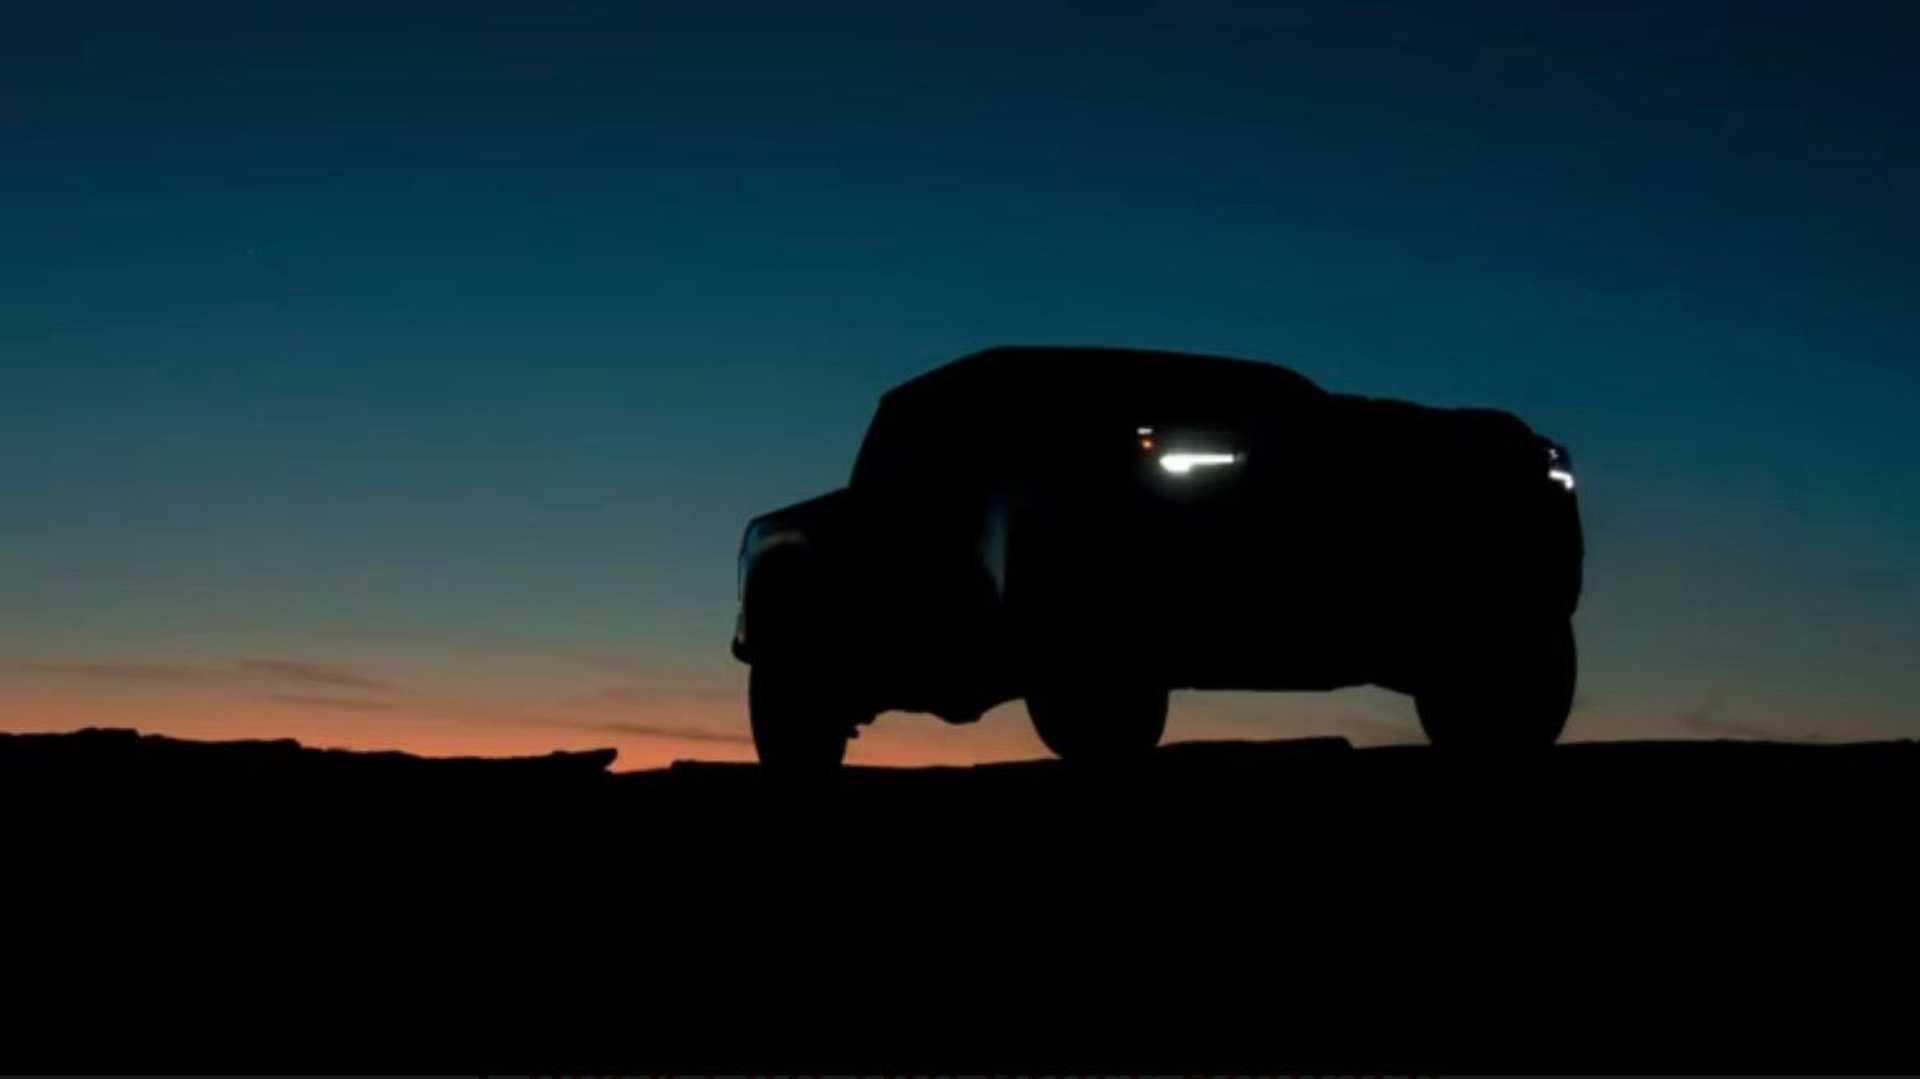 Toyota Taa Leaked Teaser Image Reveal Shadowy Pickup Form